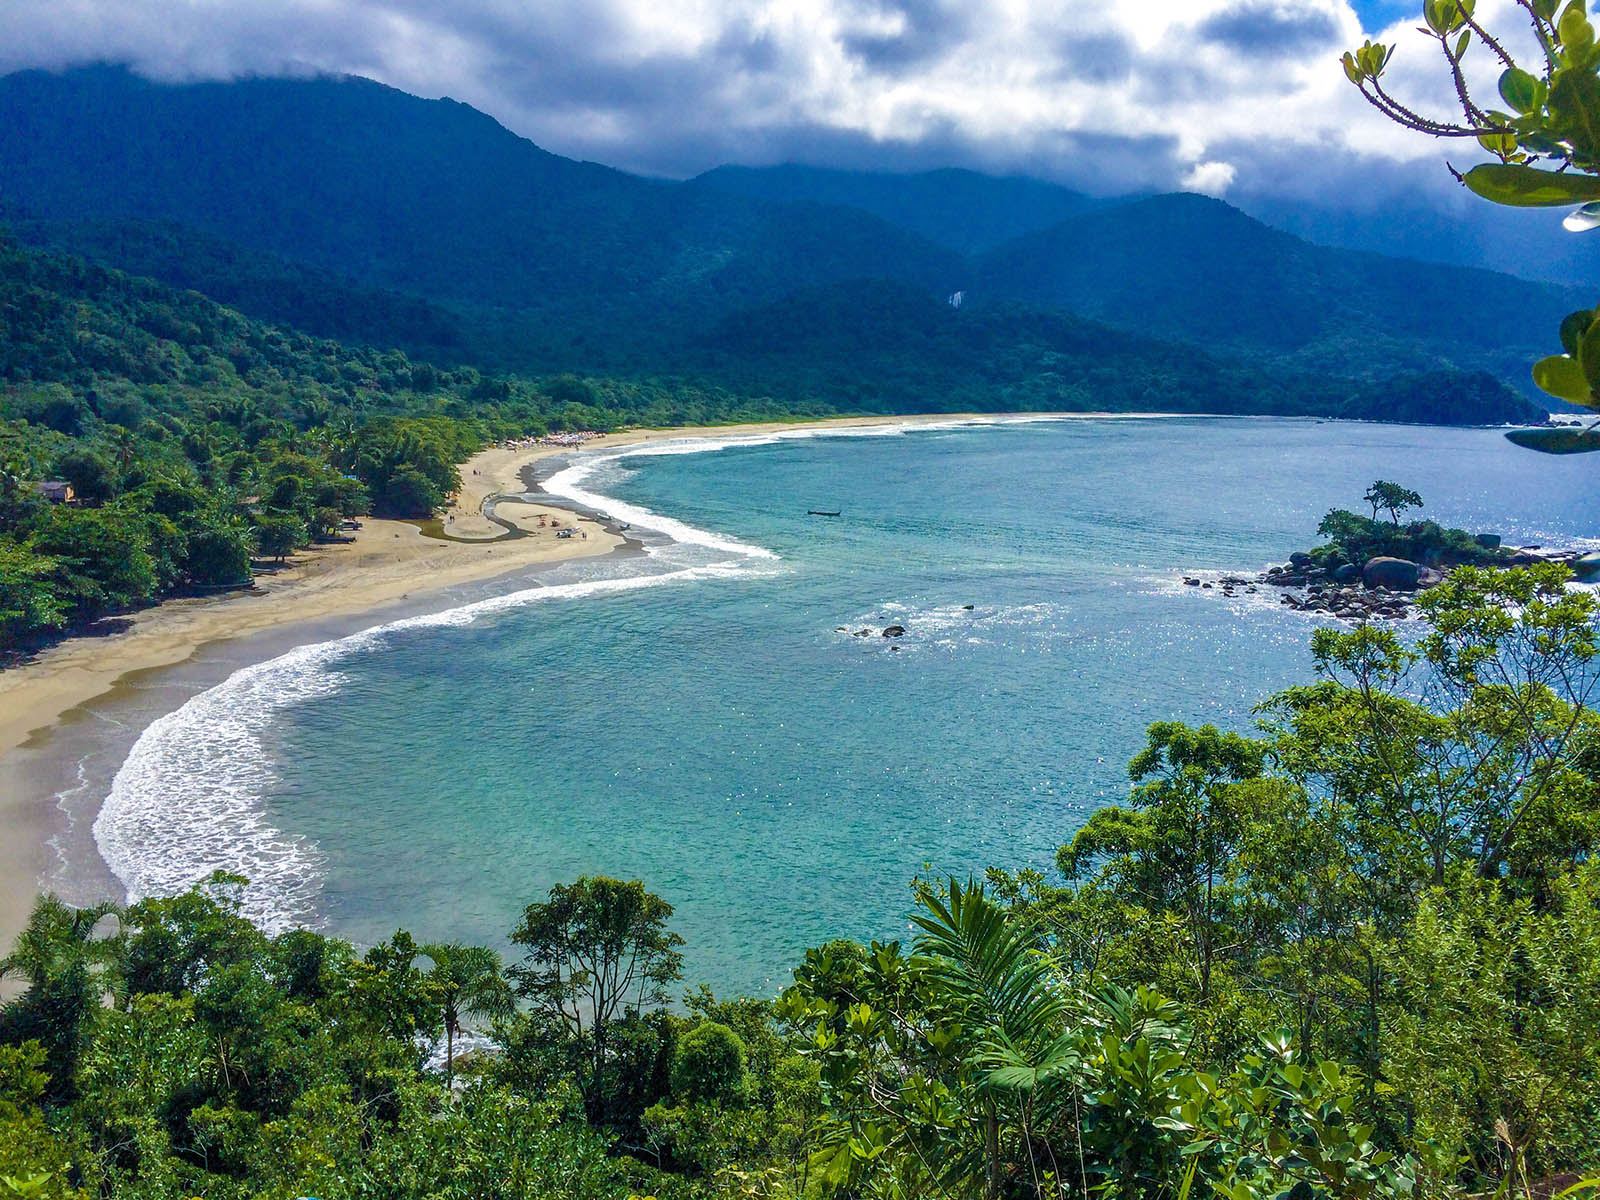 Famous for water sports, 'Ilhabela' (beautiful island) is the largest maritime island in Brazil and is located in the municipality of São Sebastião, 198 km from the city of São Paulo.